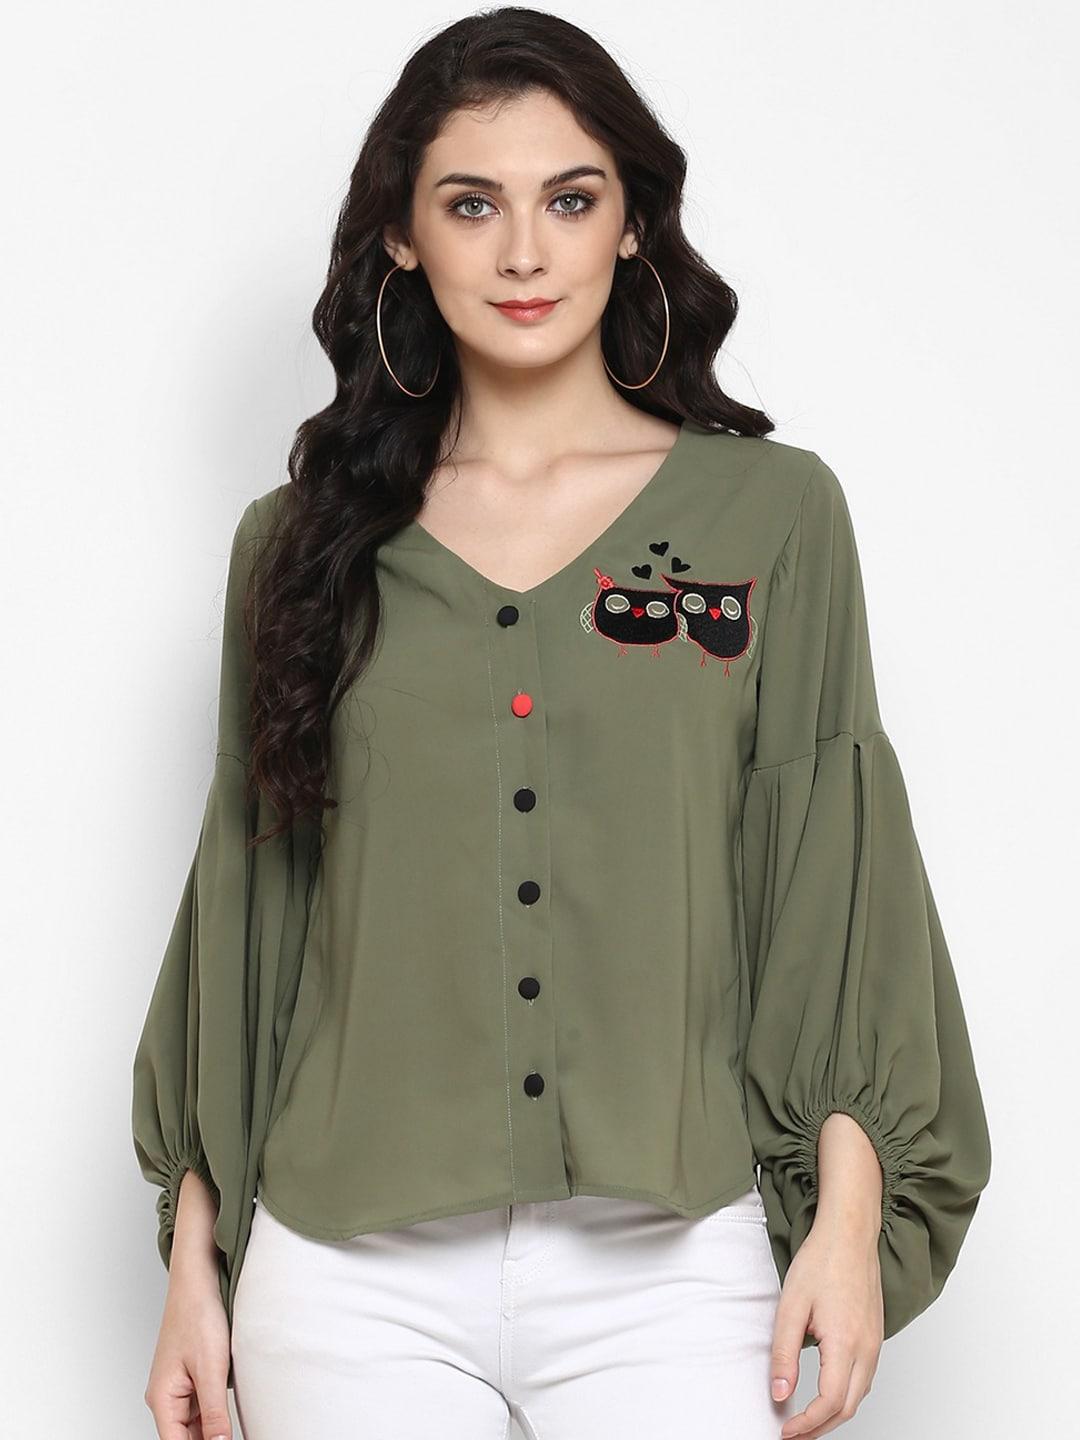 zima-leto-women-olive-green-solid-shirt-style-top